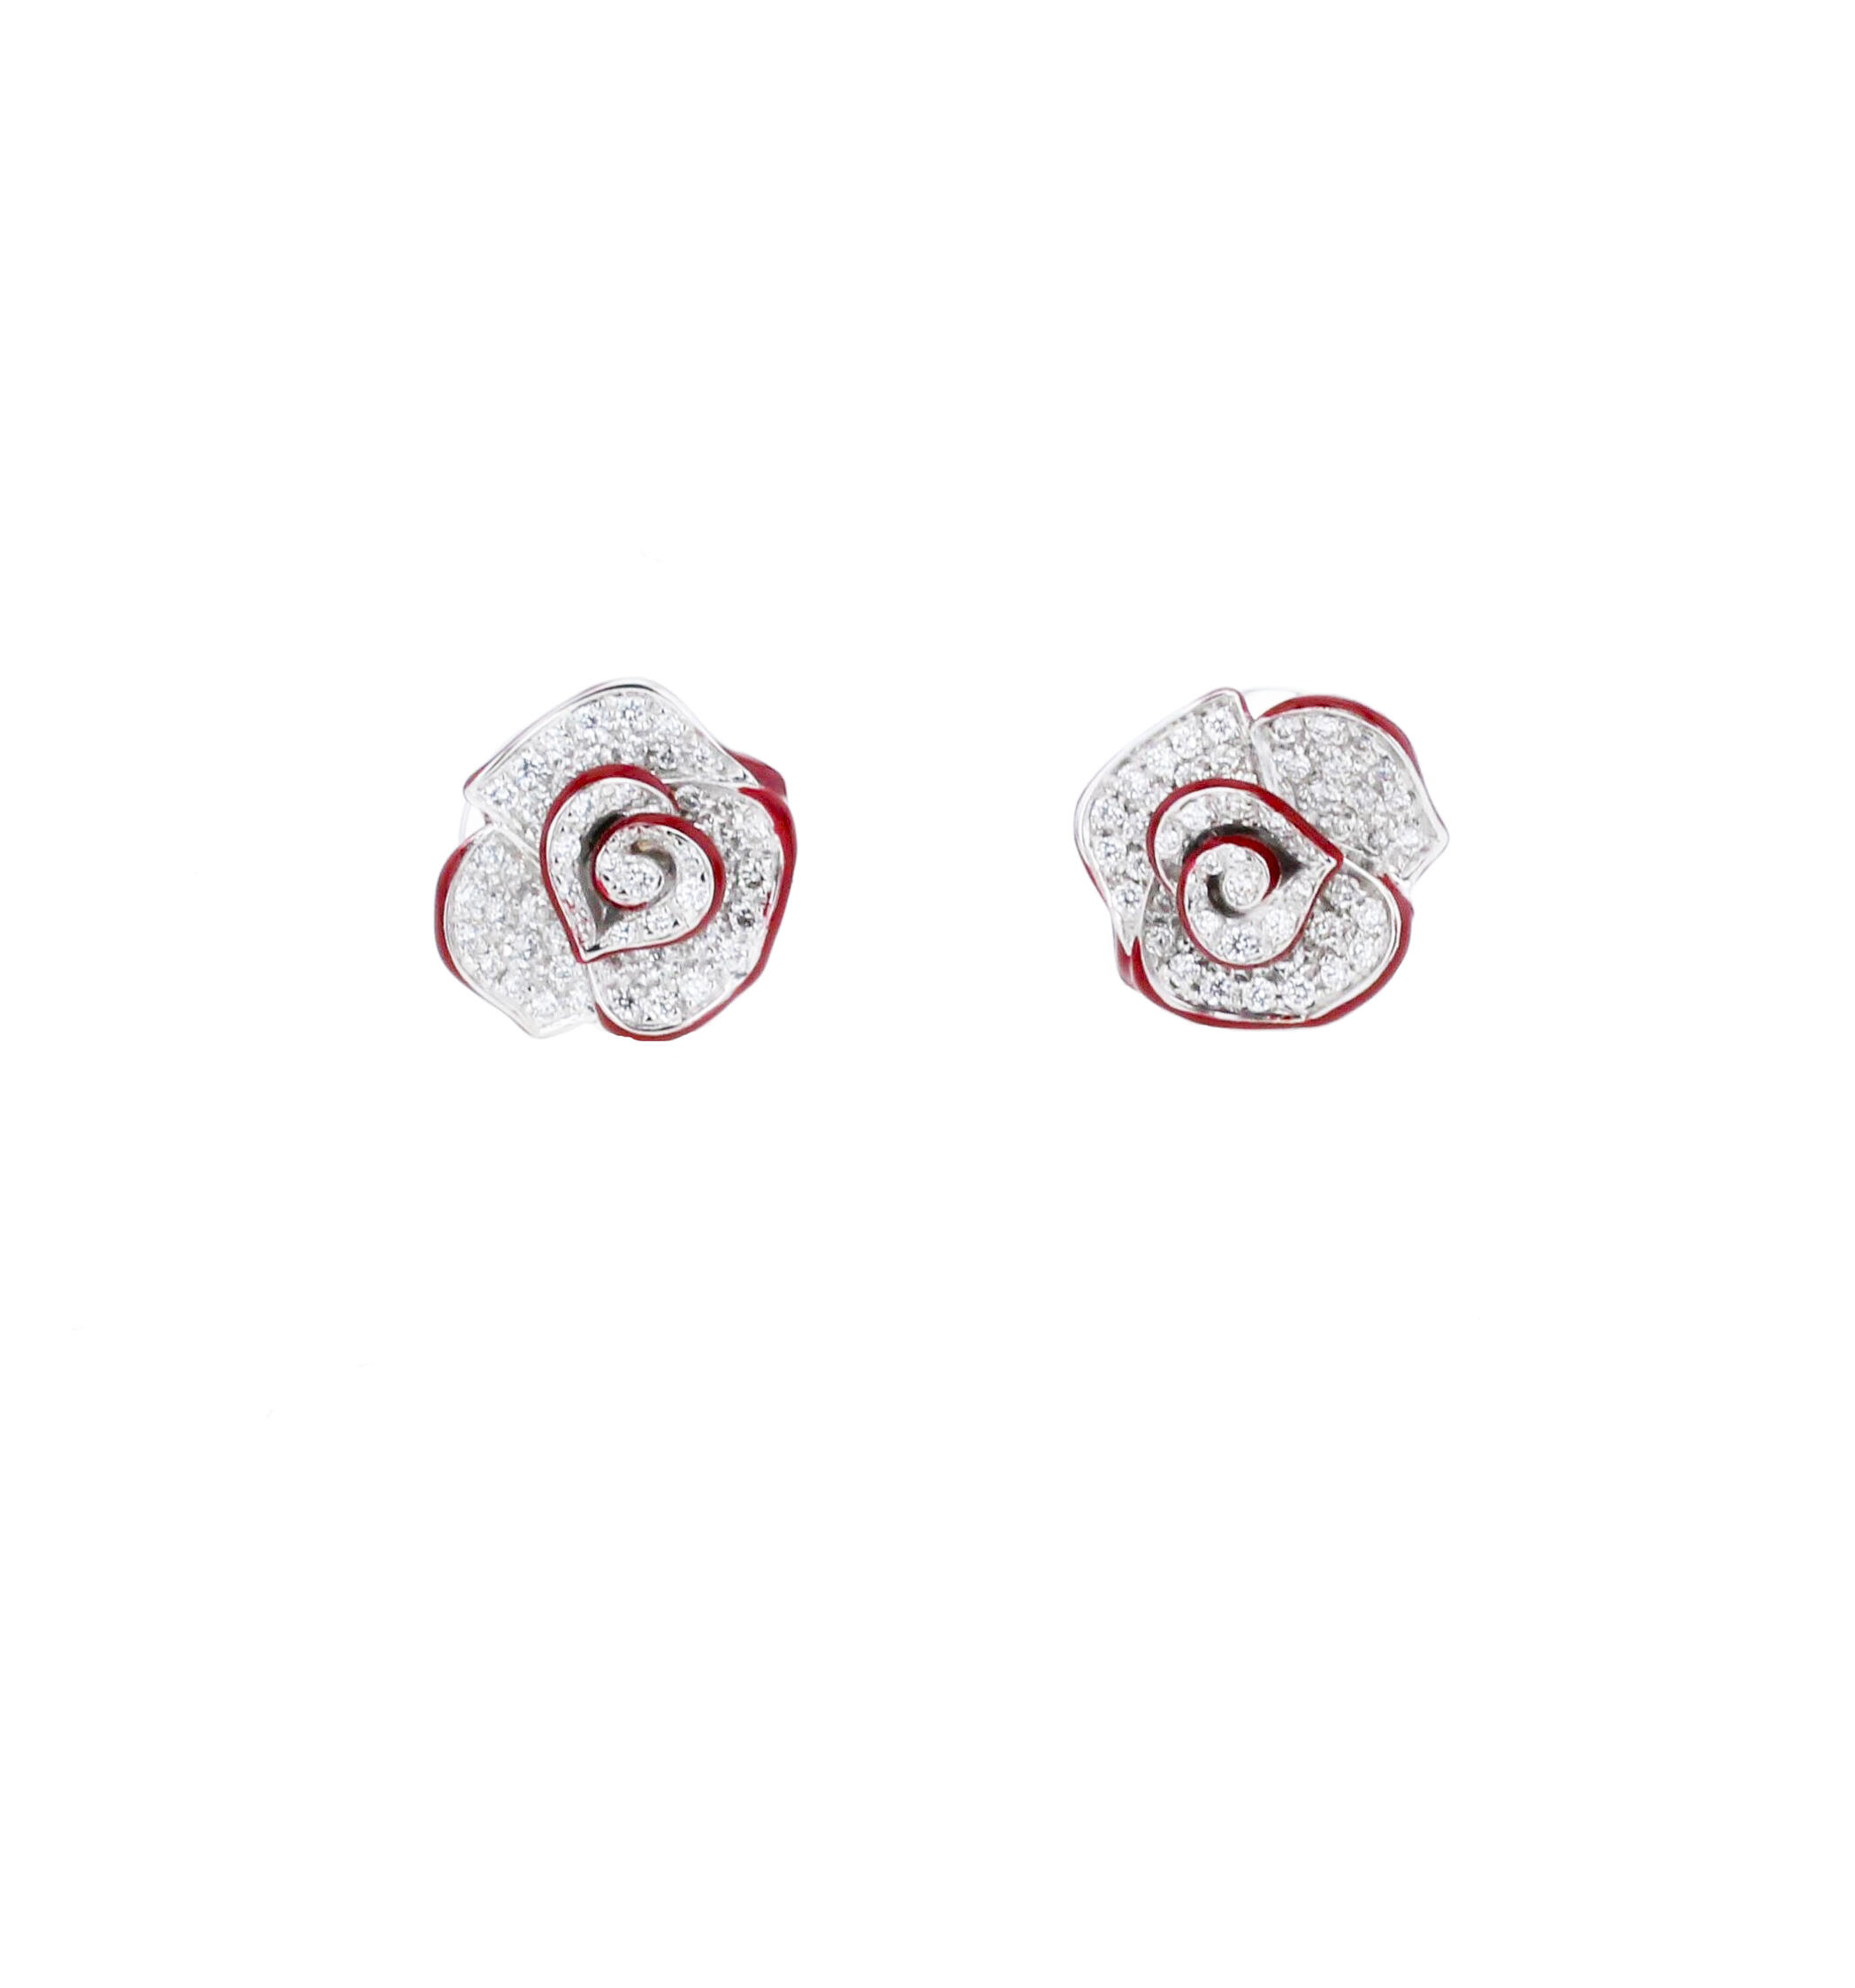 A pair of Schroeder Joailliers "Rose of Luxembourg" collection earrings in 18k white gold